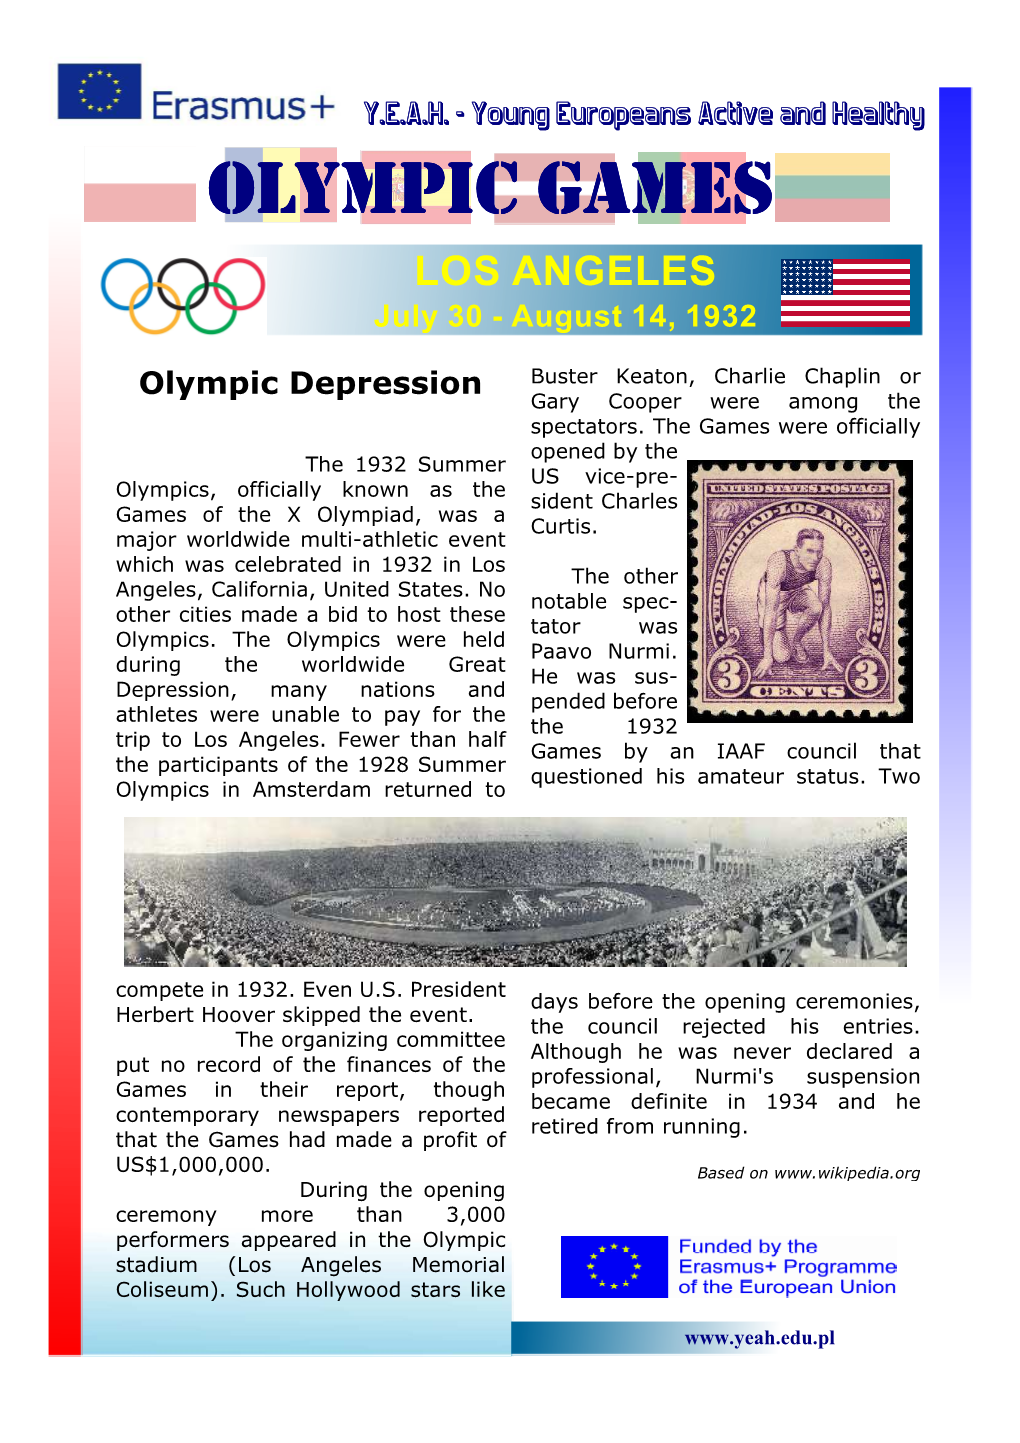 OLYMPIC GAMES LOS ANGELES July 30 - August 14, 1932